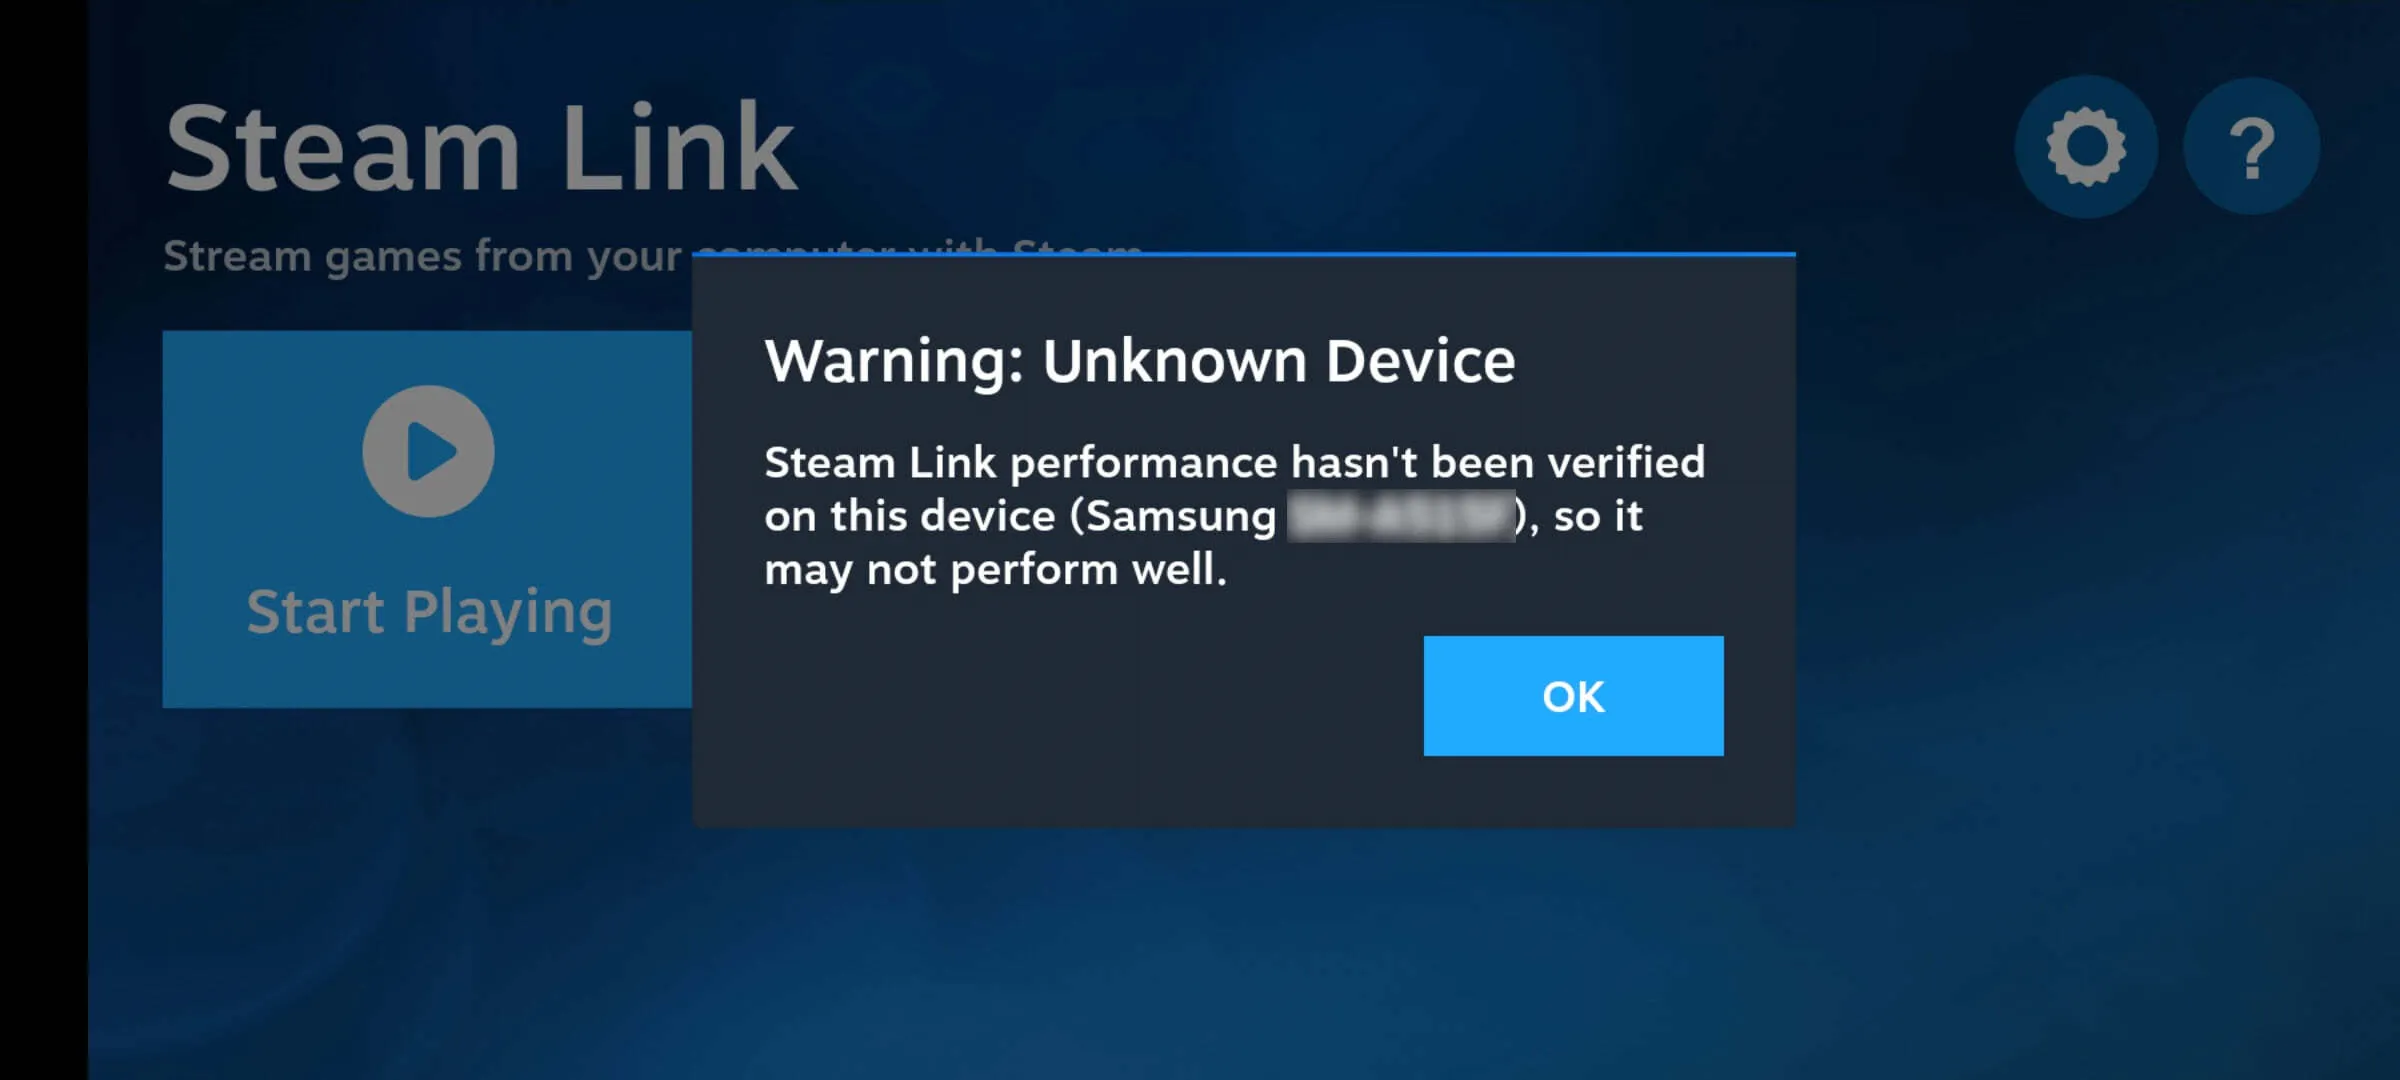 Steam Link performance not verified on unknown device warning